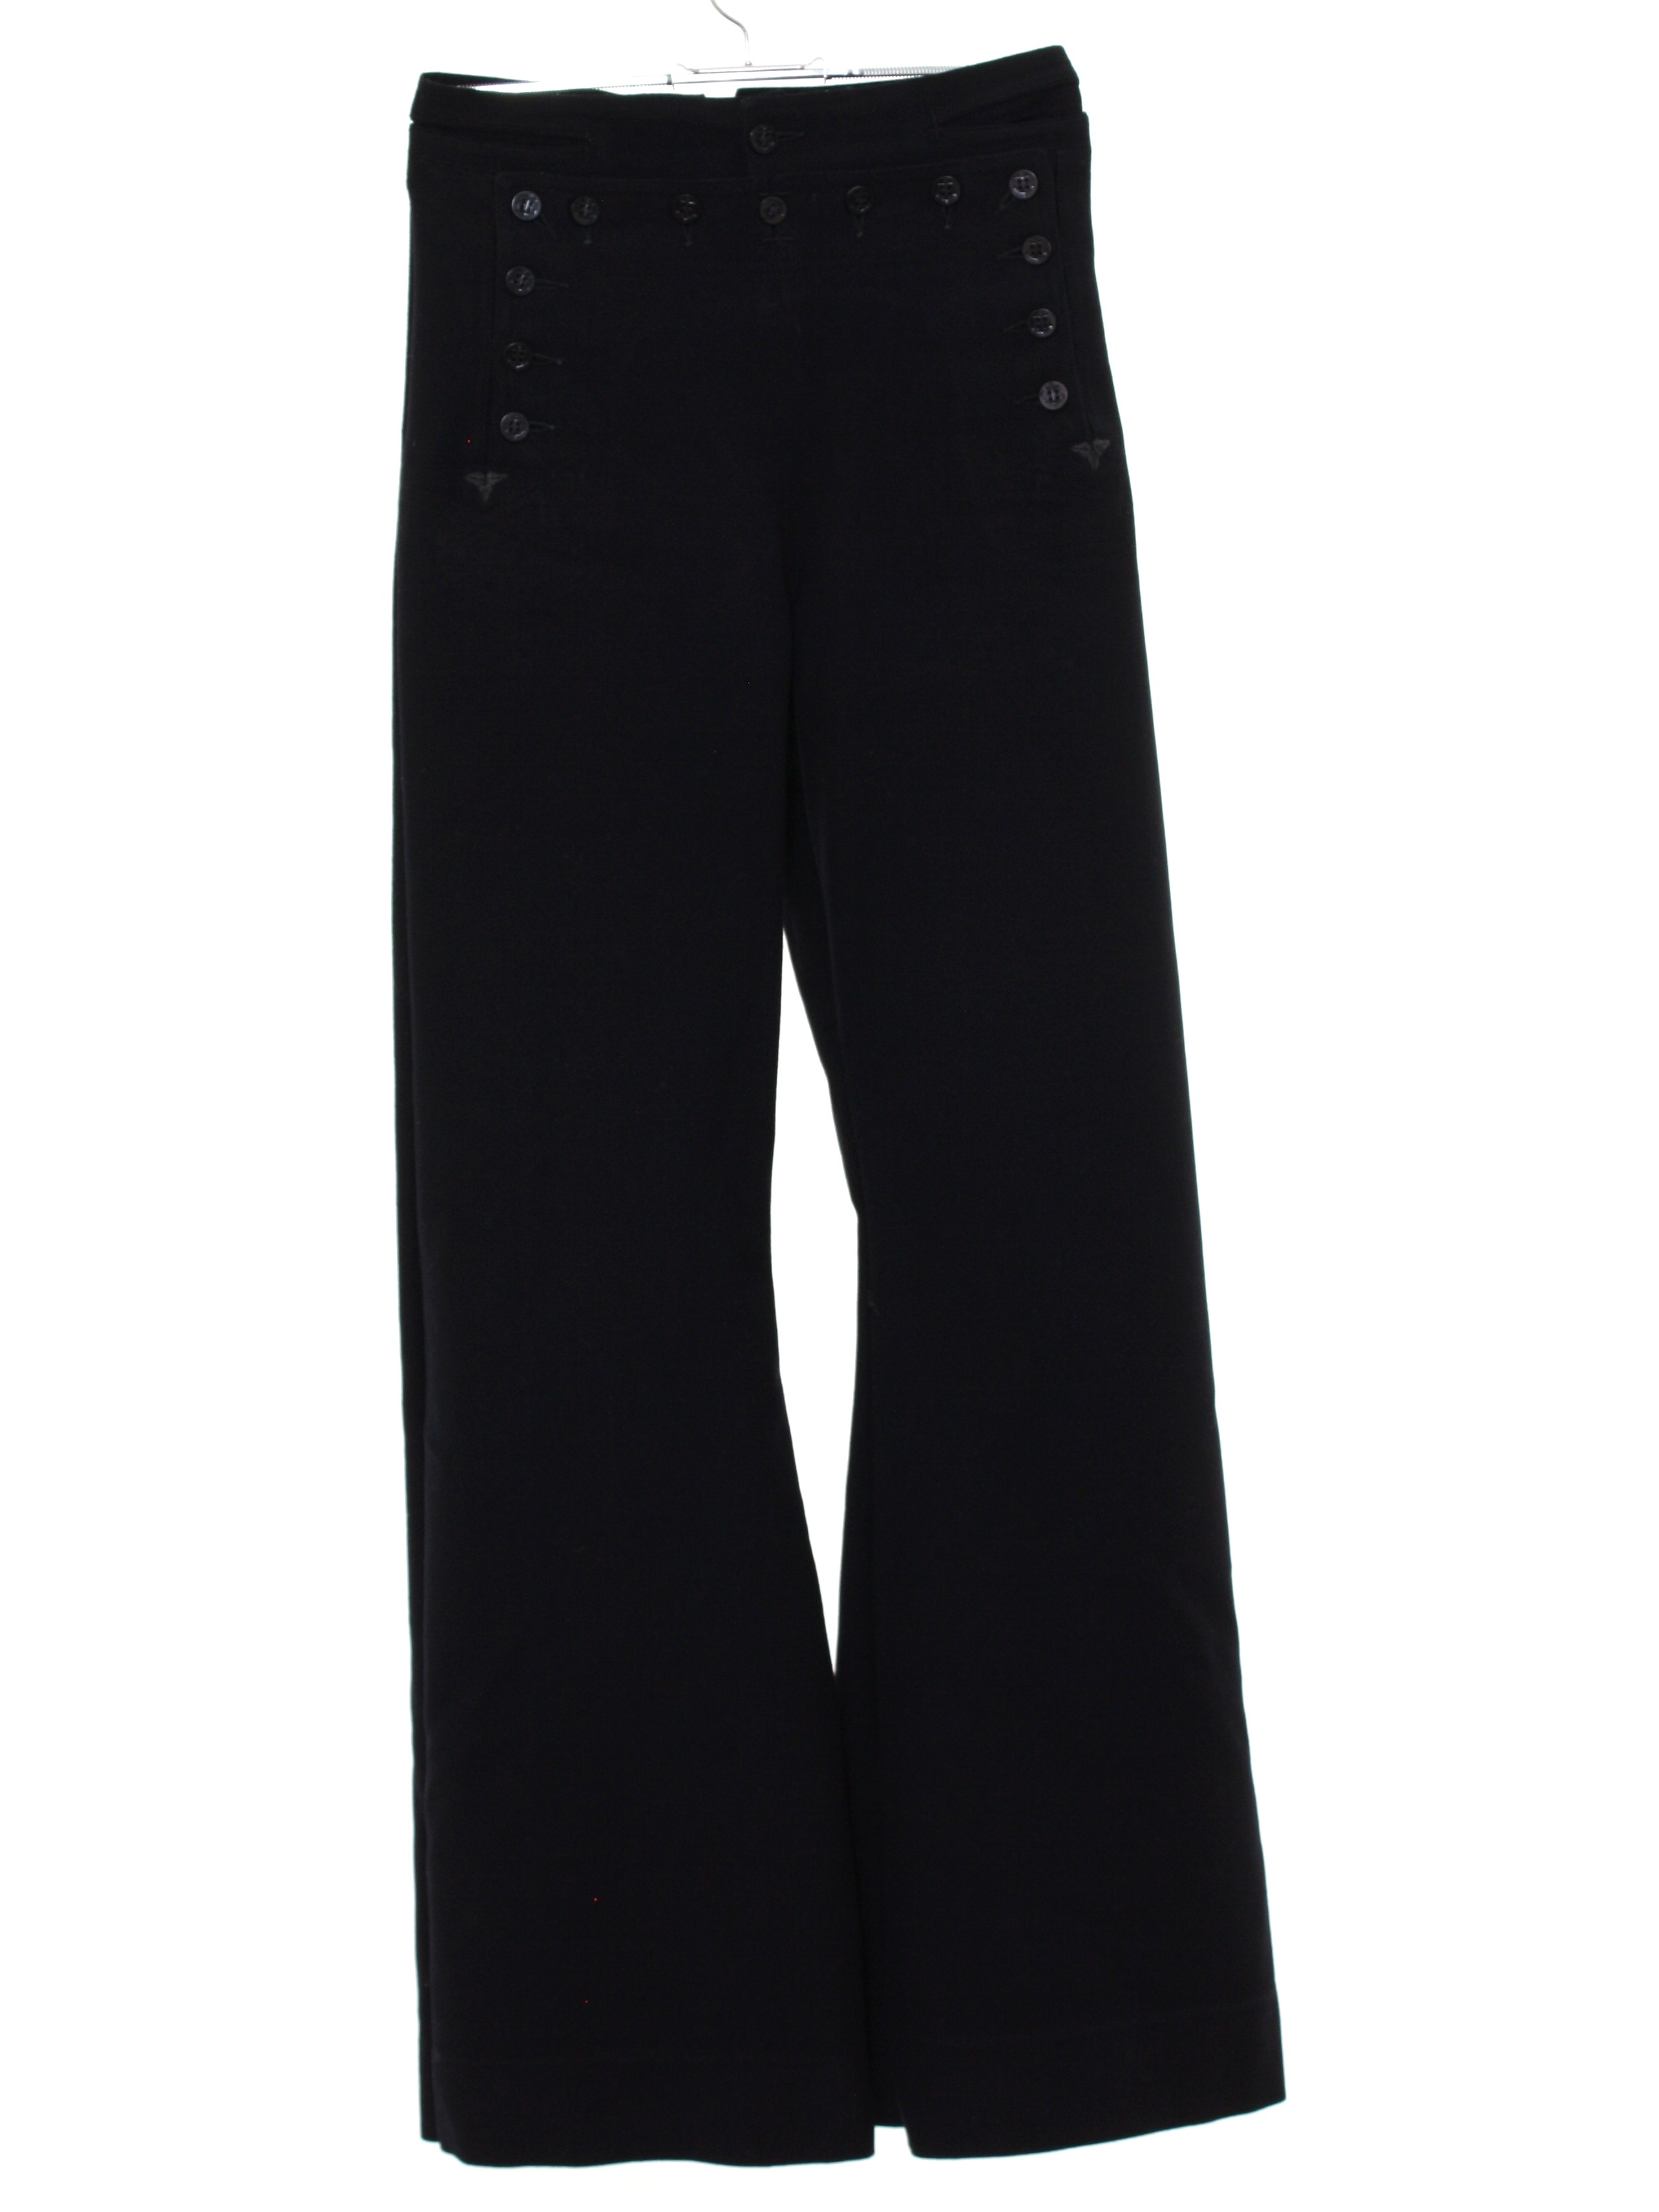 Retro 60s Bellbottom Pants (Navy Issue) : 60s -Navy Issue- Mens ...